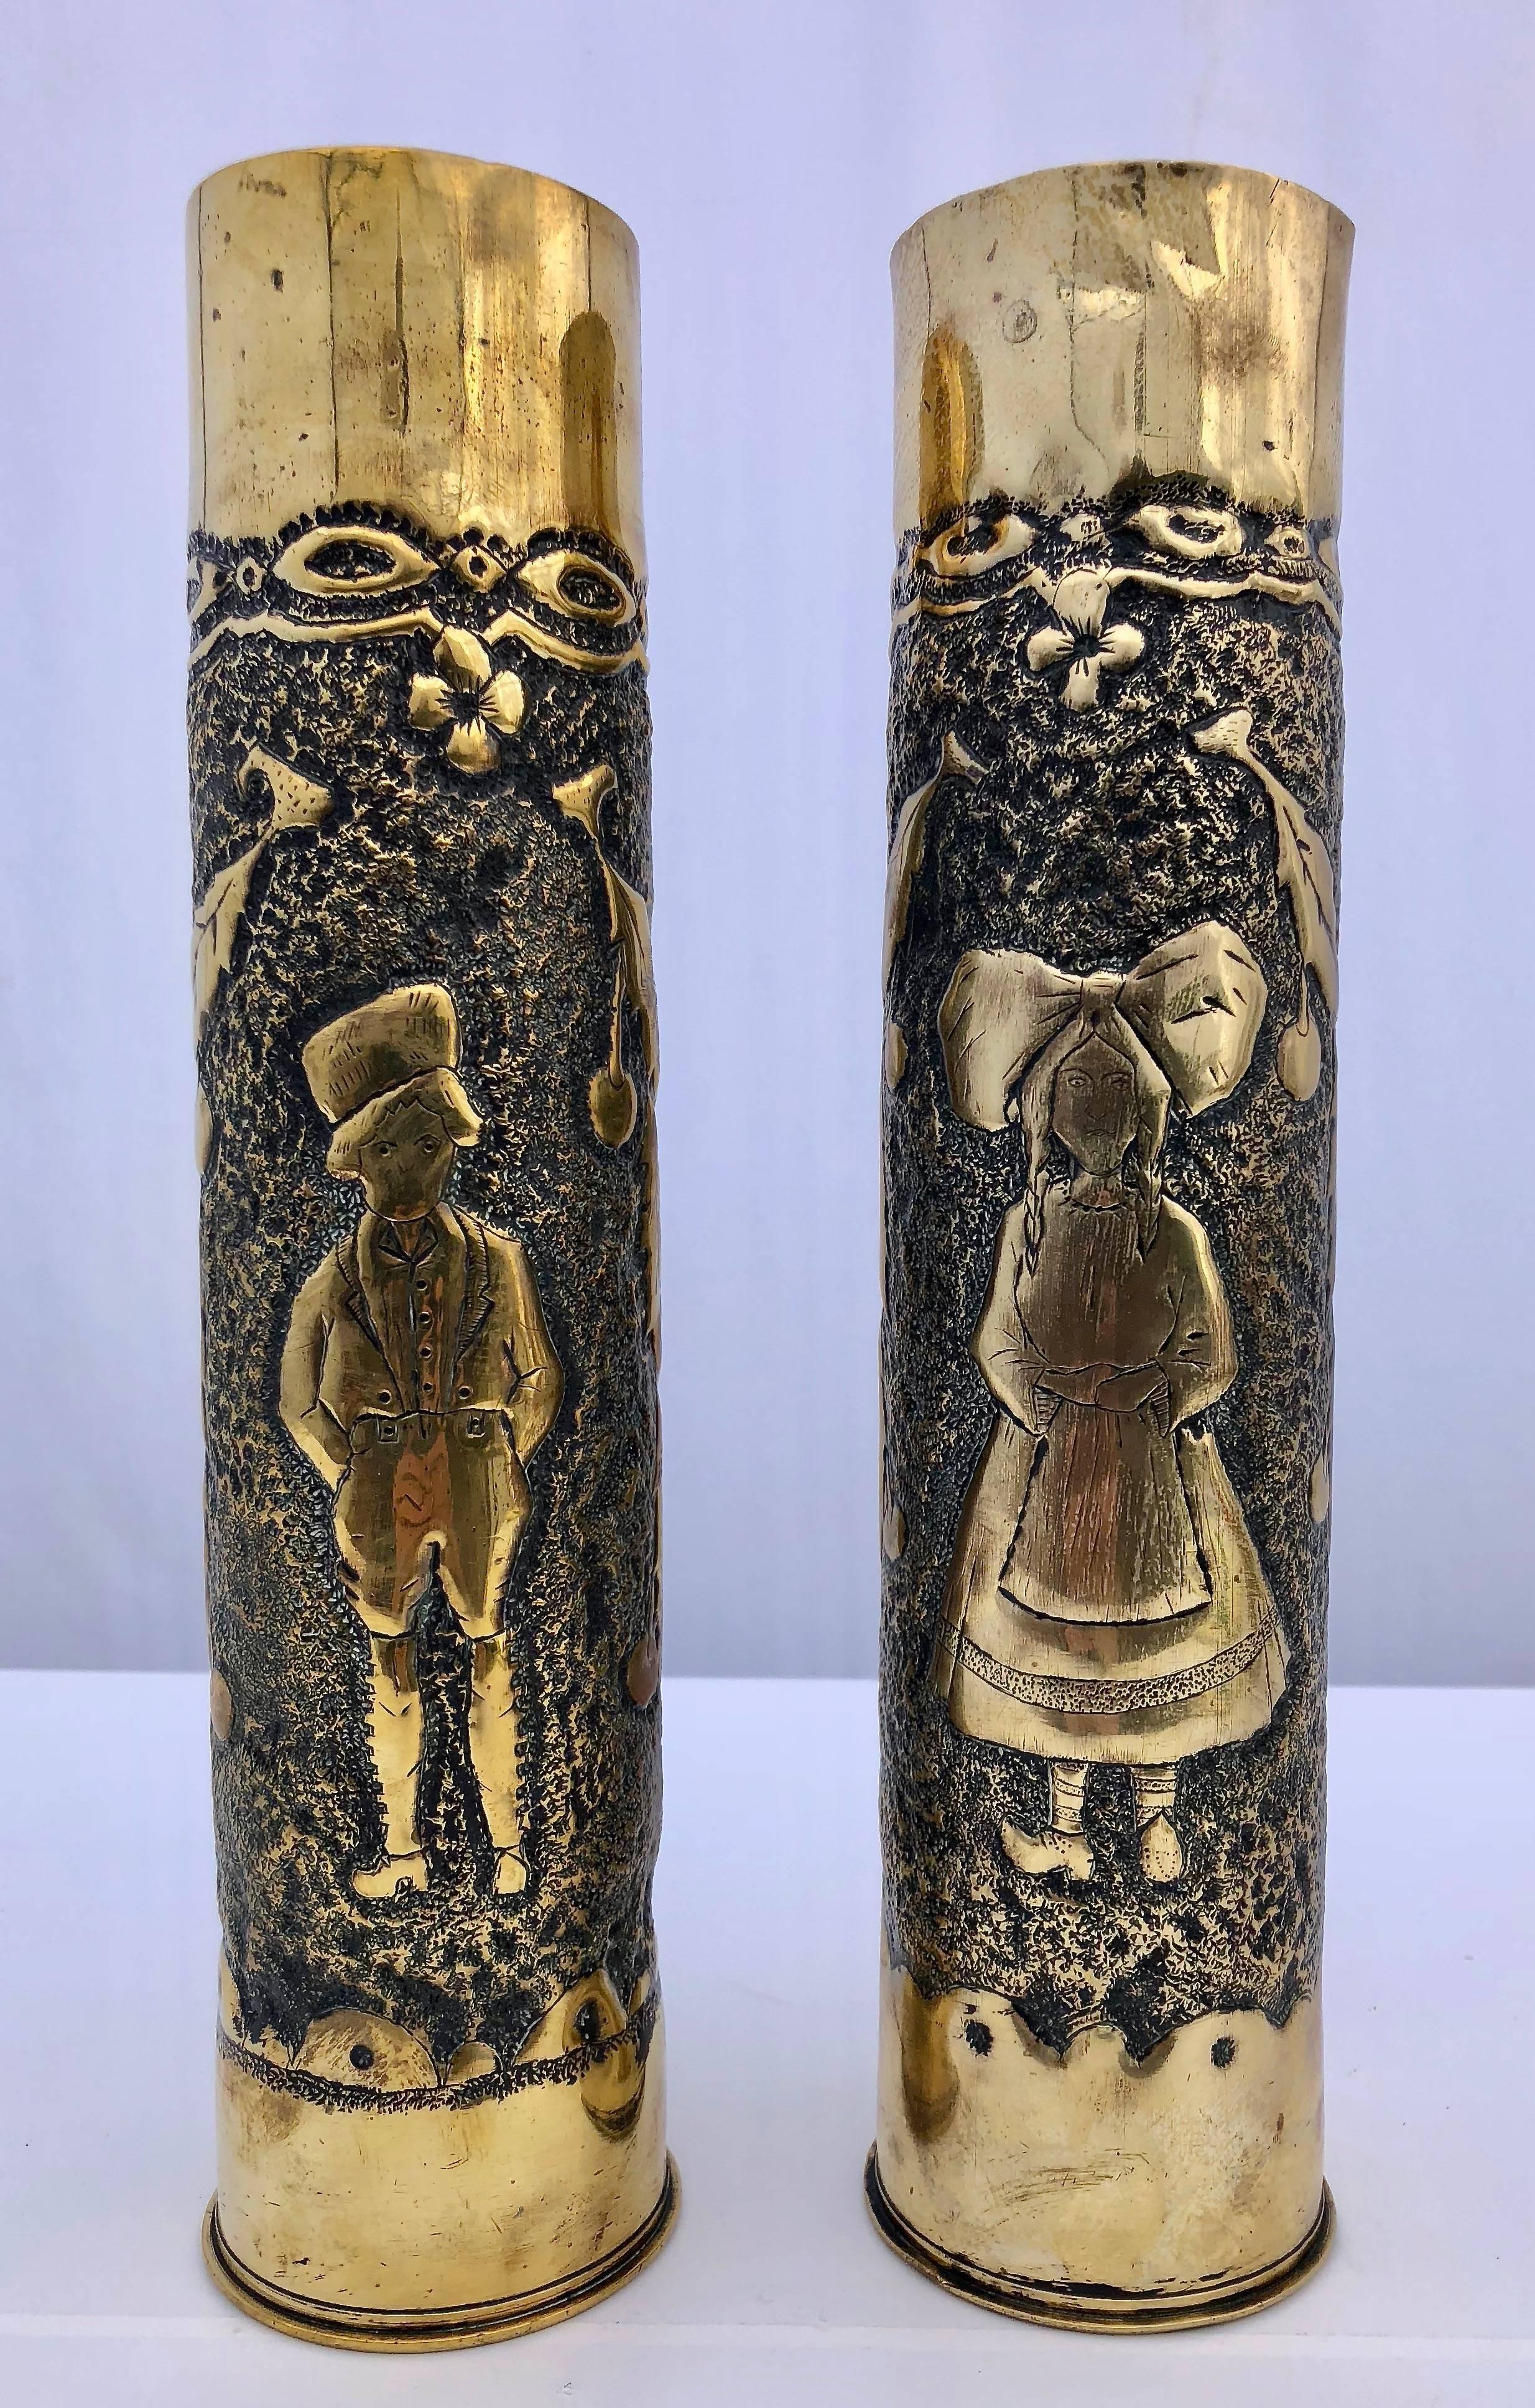 This gorgeous pair of carved brass mortar shells are of a young couple wearing traditional Lorraine or Alsace costumes with matching floral decorations. There are in great condition, especially considering their 100 year old age. To see this